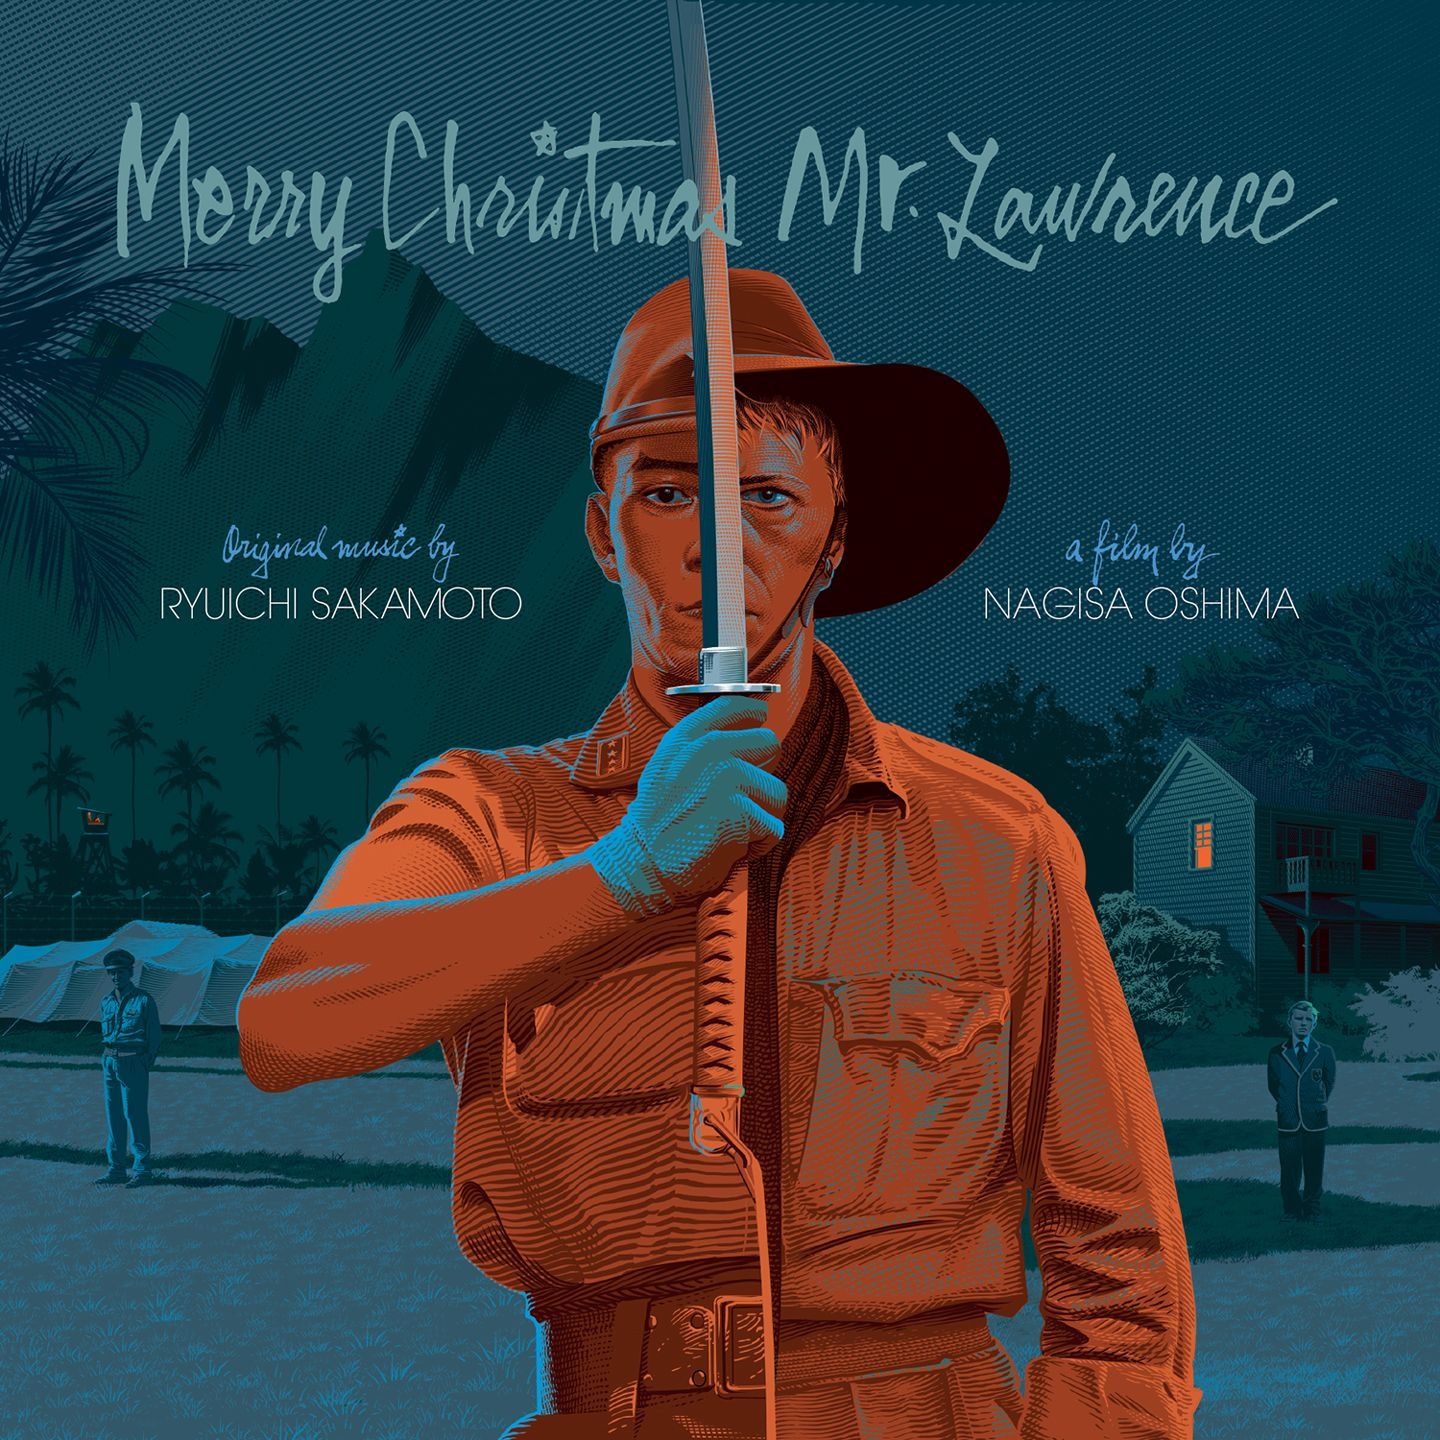 Merry Christmas Mr. Lawrence (Original Motion Picture Soundtrack)